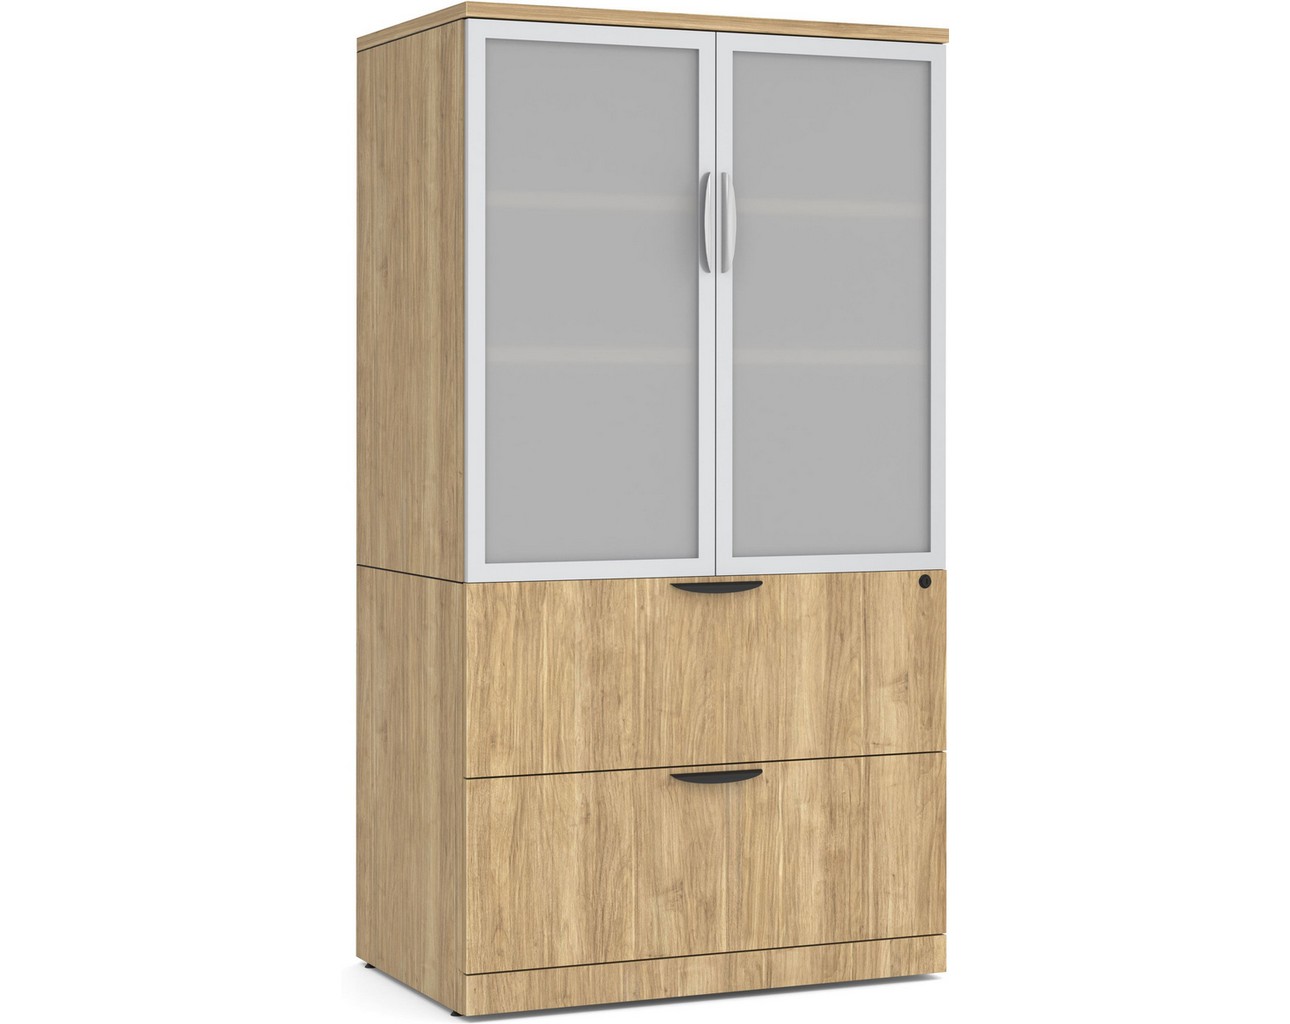 Locking Storage Cabinet and Lateral File Combo Unit with Glass Doors – Cherry